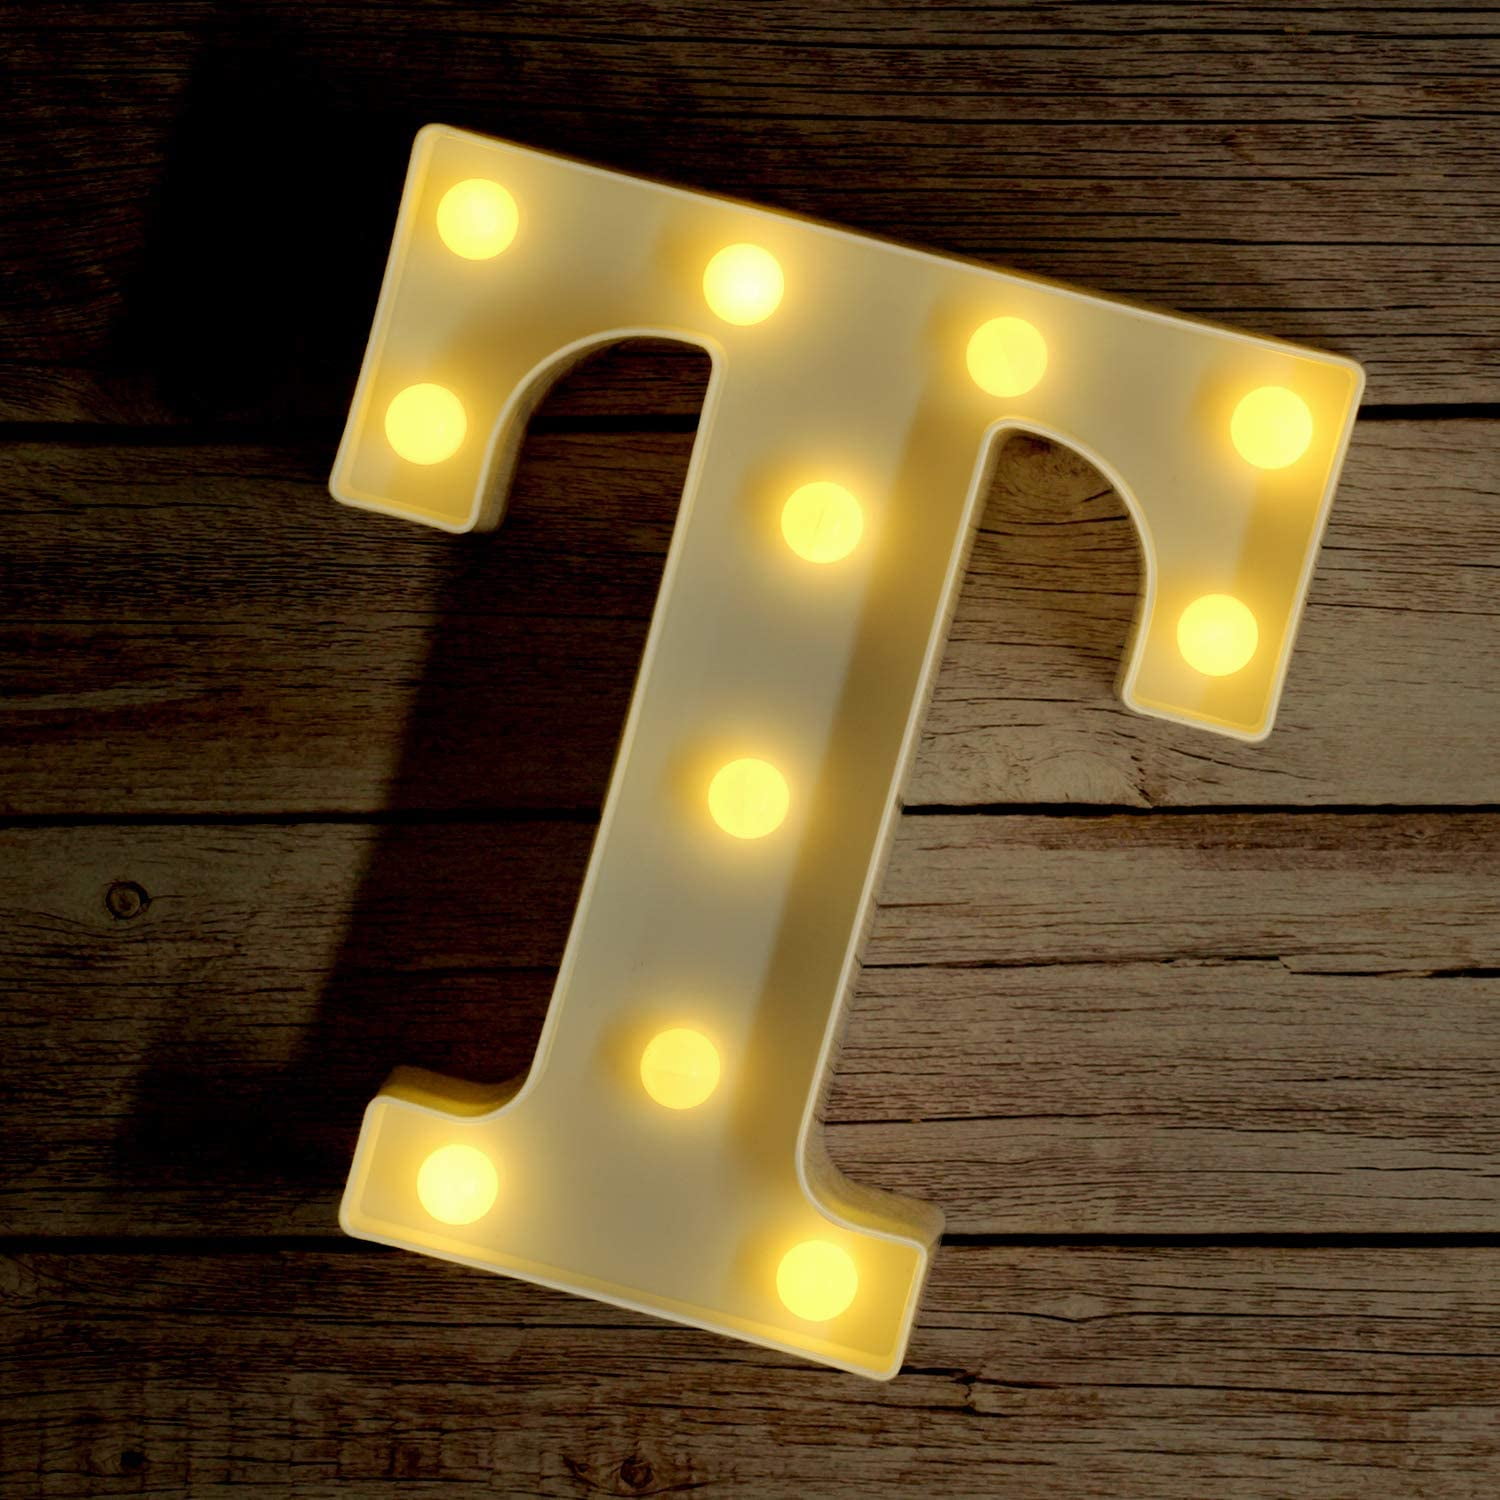 WATOPI Warm Bright Alphabet Letters Digital Sign Lights Initials Captial LED Q Numbers LED Standing Battery Operated for Birthday Anniversary Party Home Room Garden 